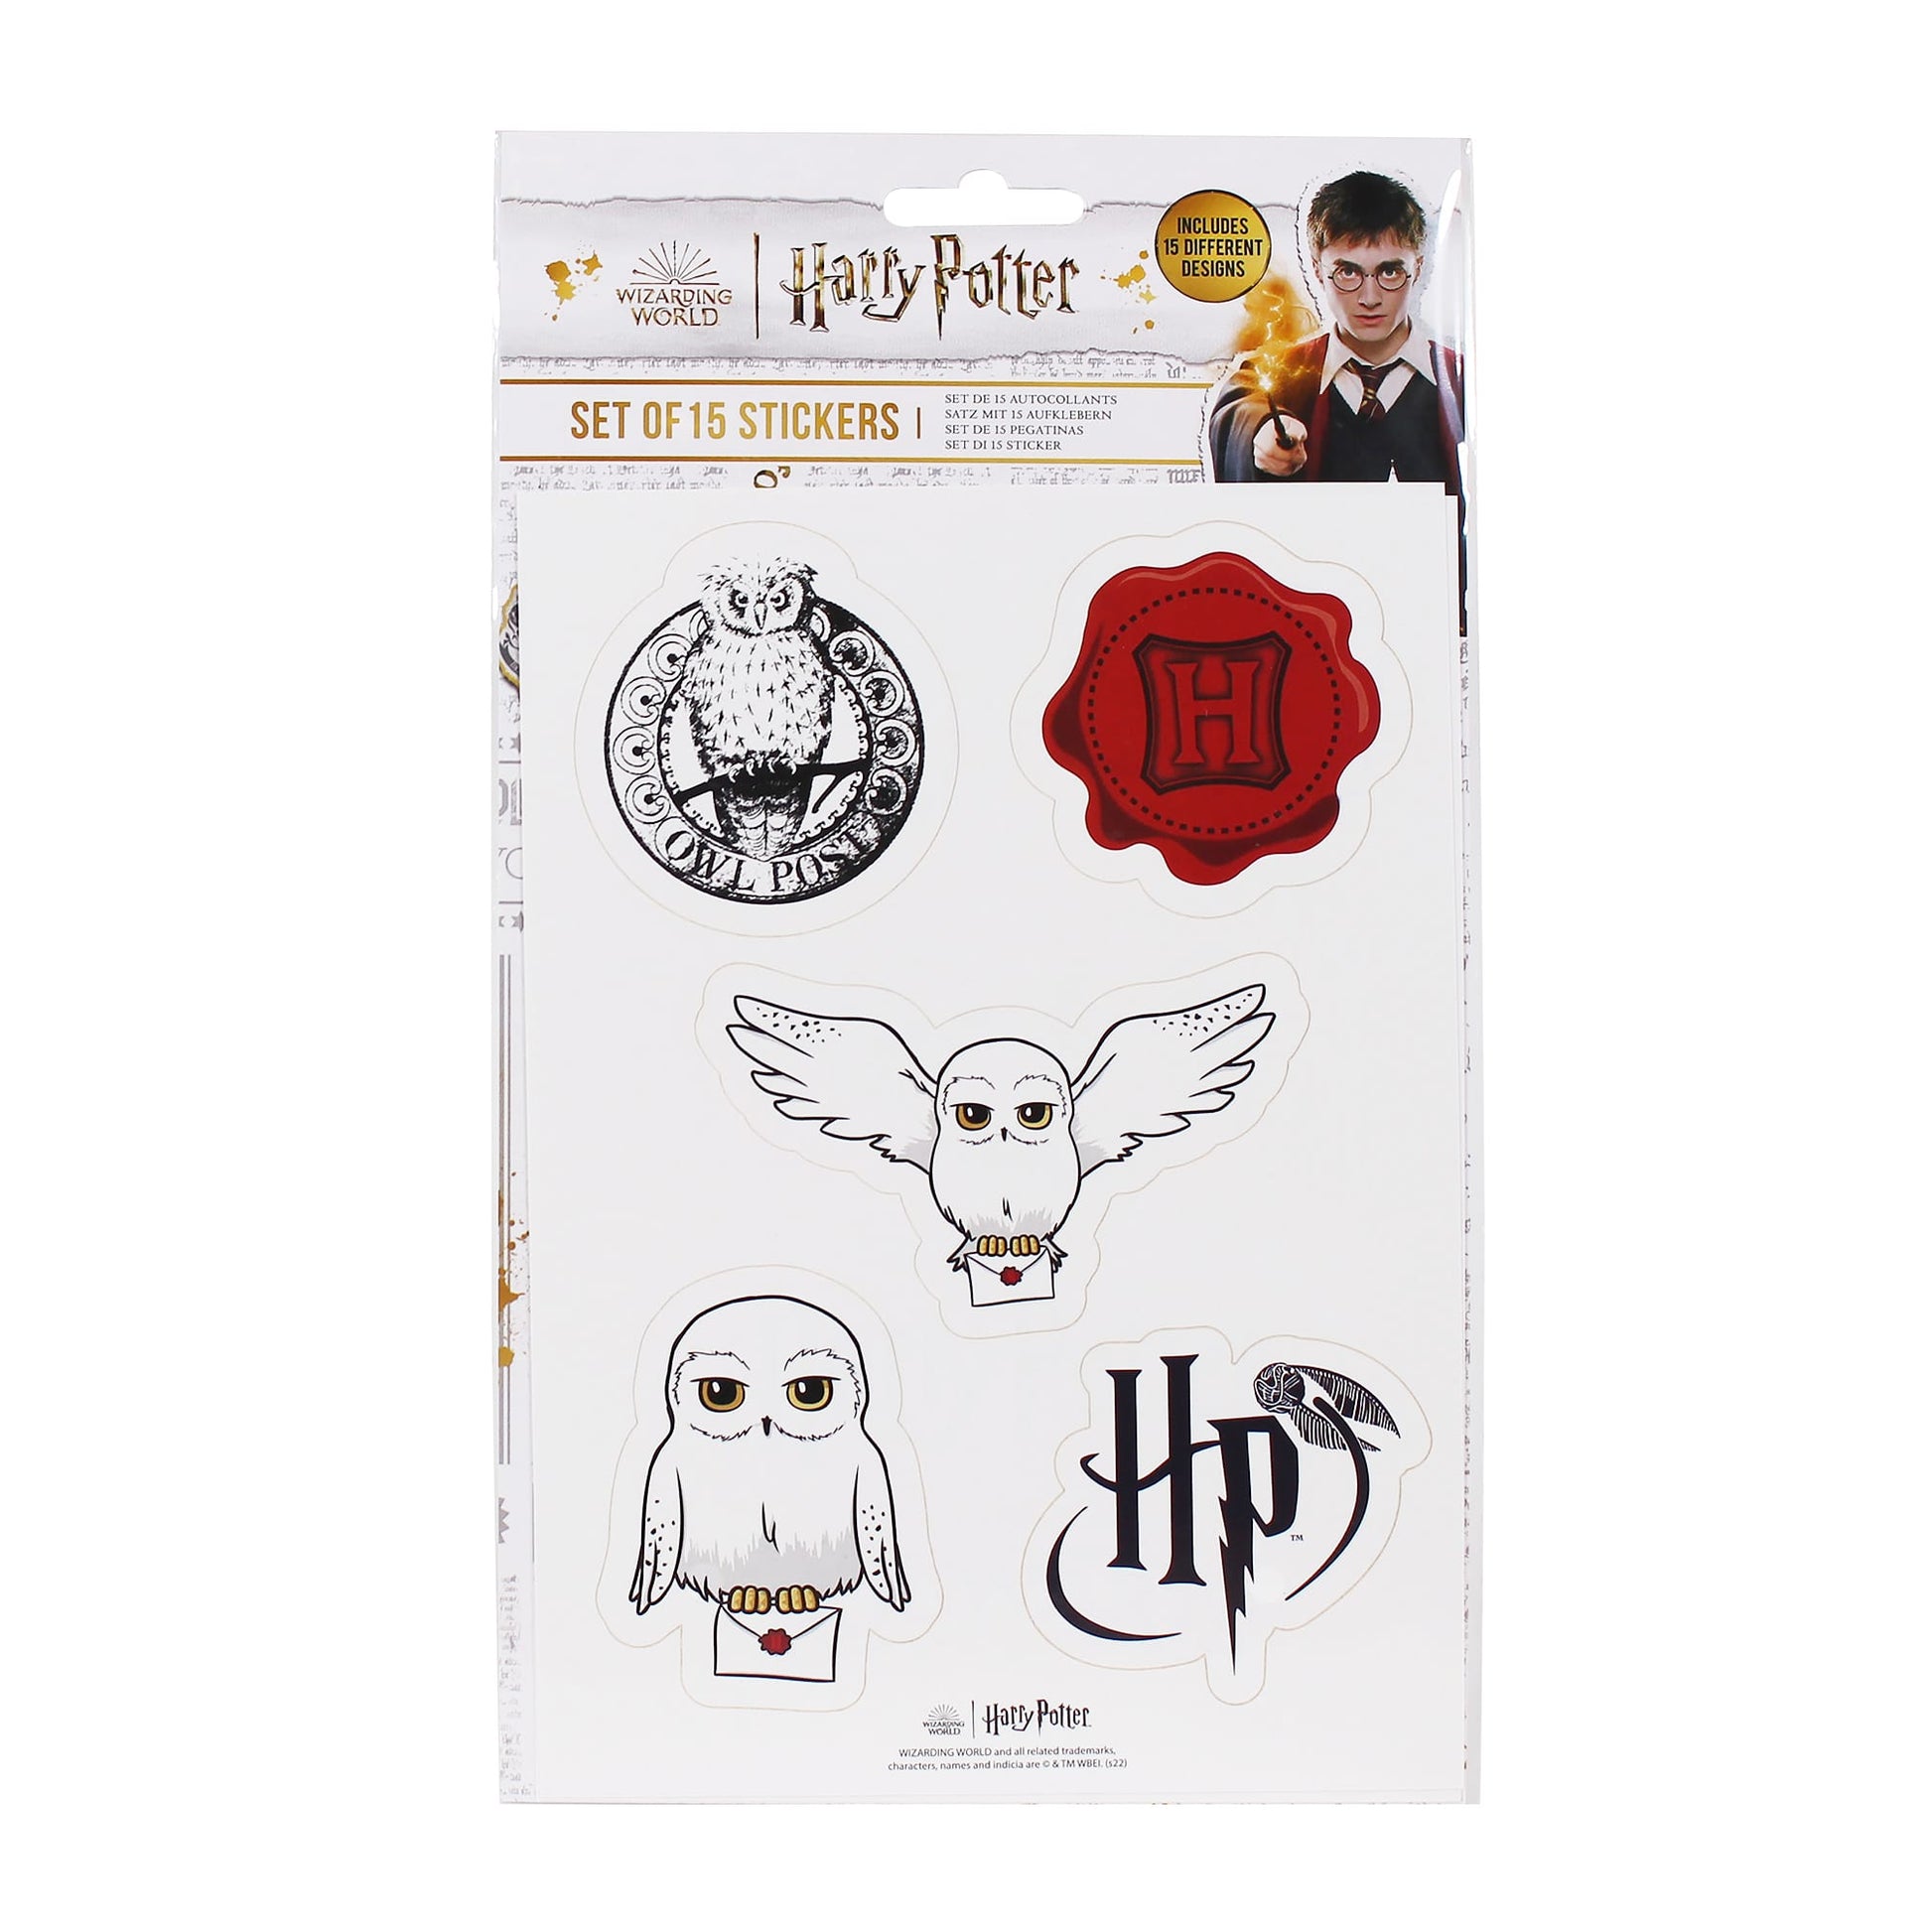 Hedwig & Hogwarts Stickers Sheet - Harry Potter Gifts